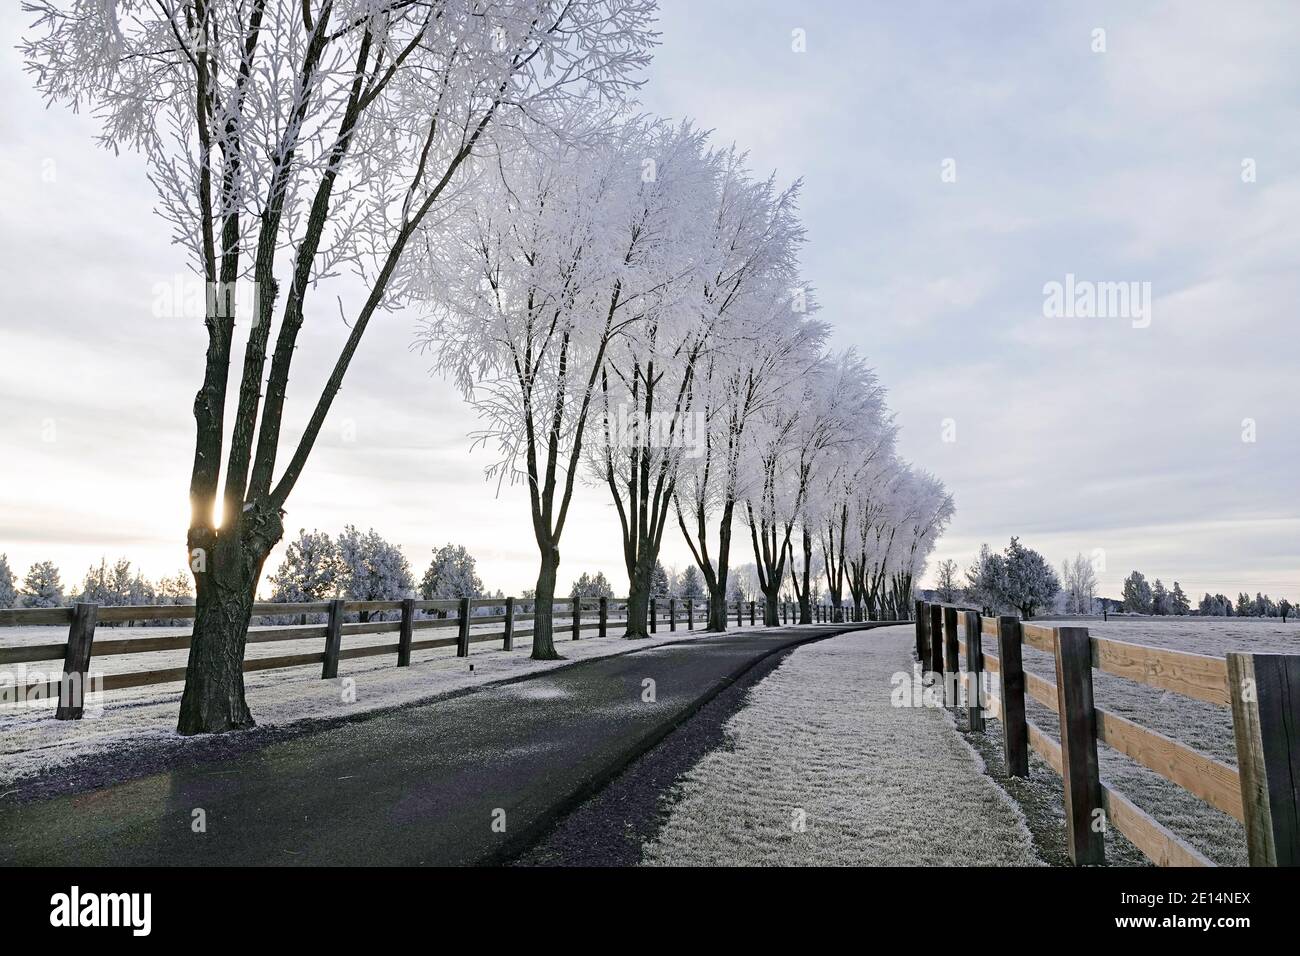 Willow trees lining a country lane covered with frost on an icy December morning in central Oregon. Stock Photo